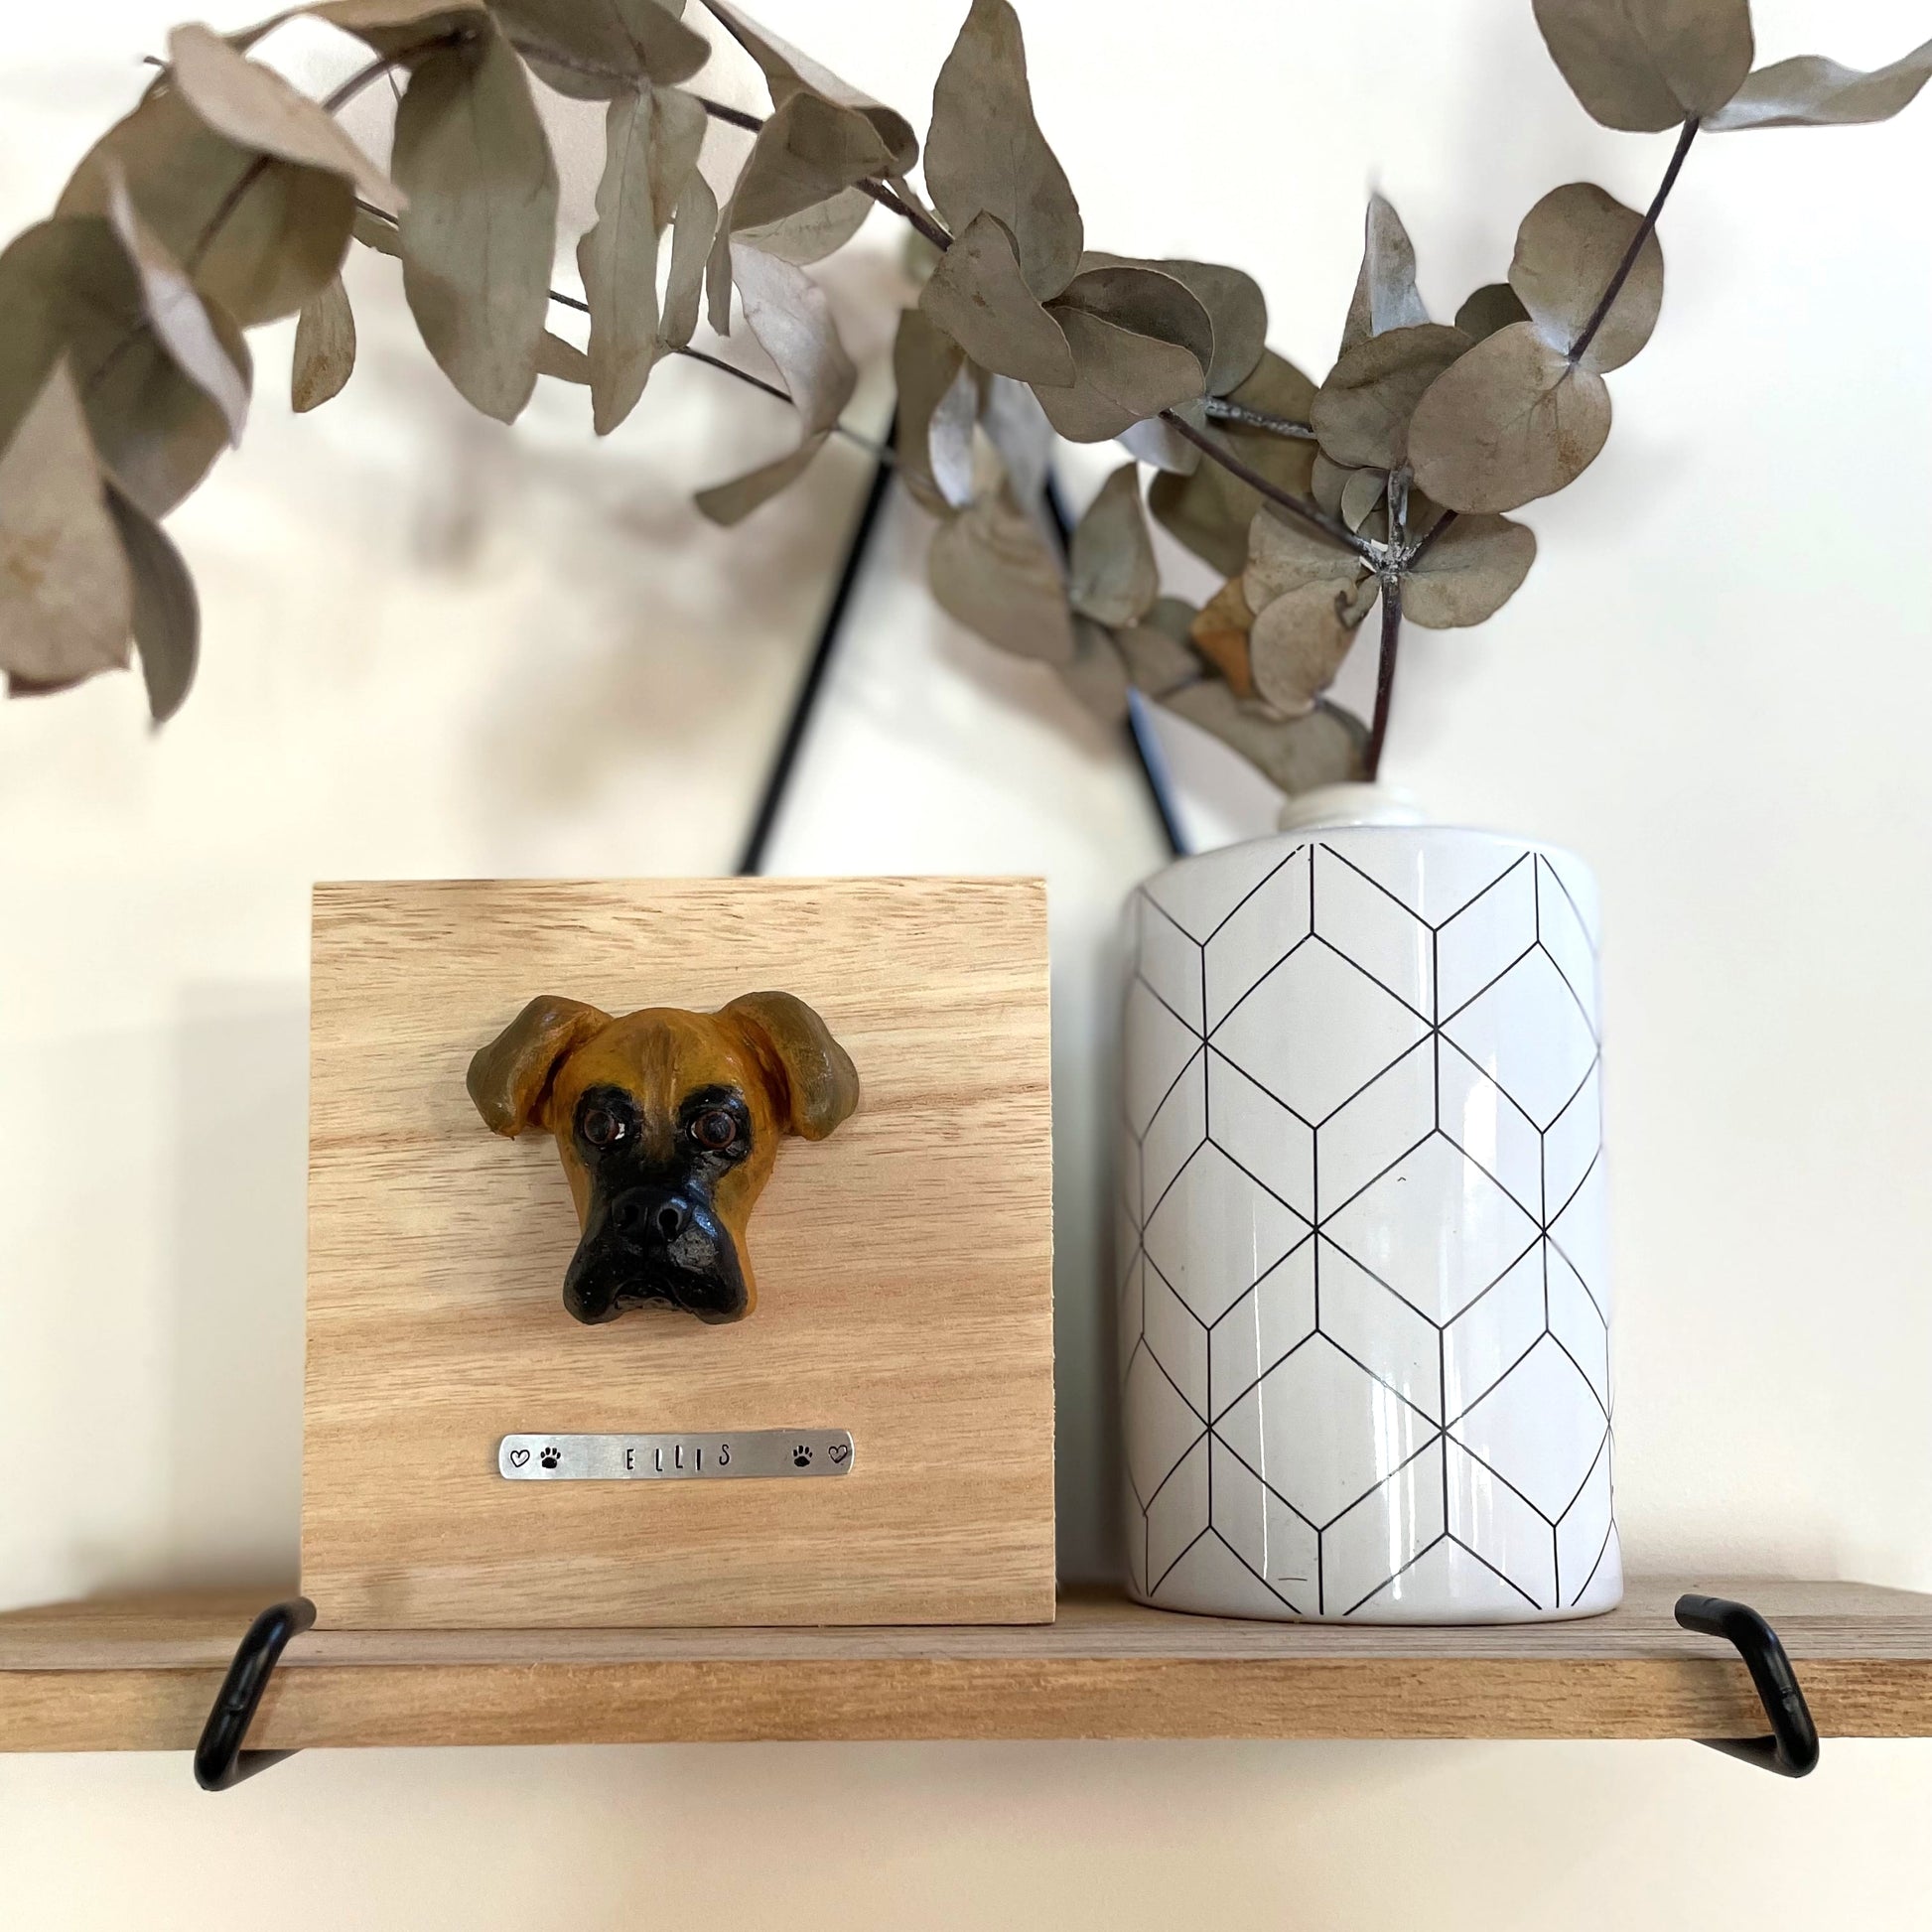 Custom timber pet memorial keepsake box with handscultped dog face on the lid, with a name plaque reading Ellis, positioned beside vase.